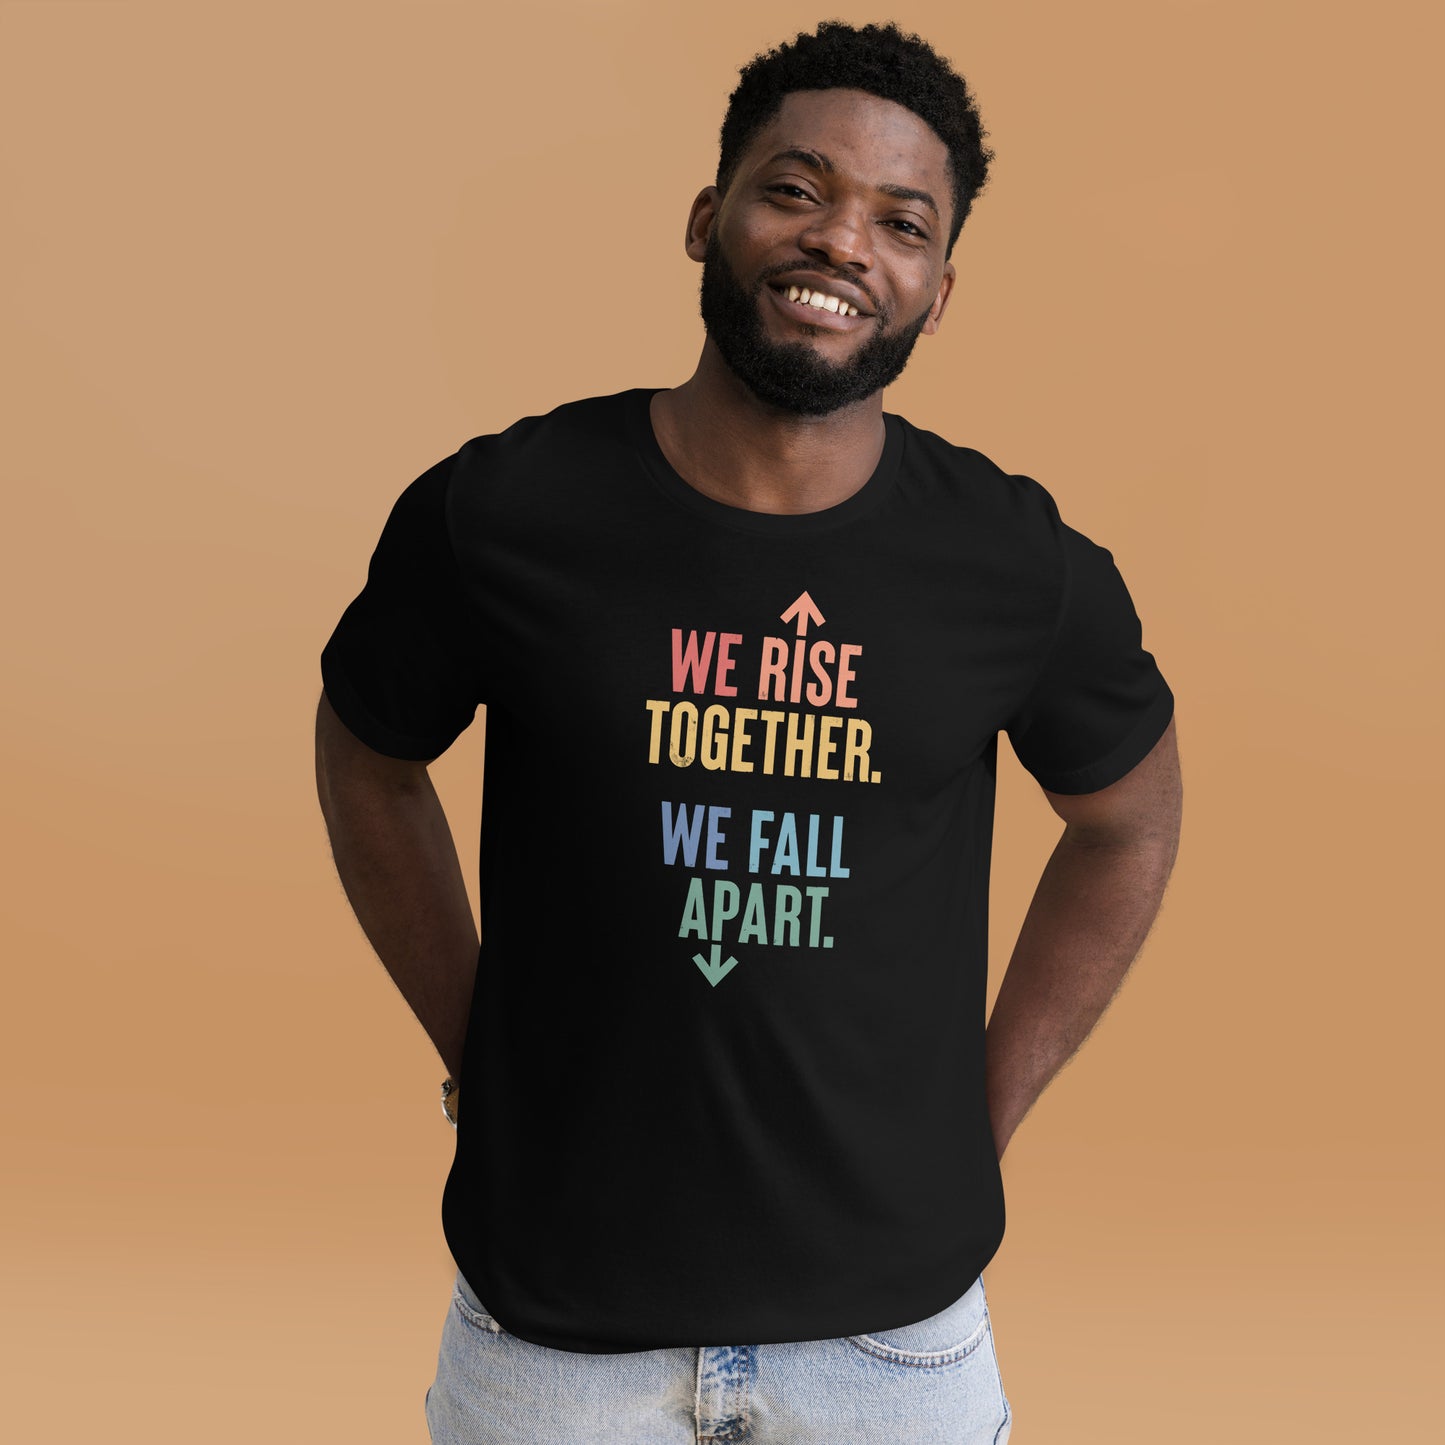 We Rise Together - Men’s/Unisex Tee